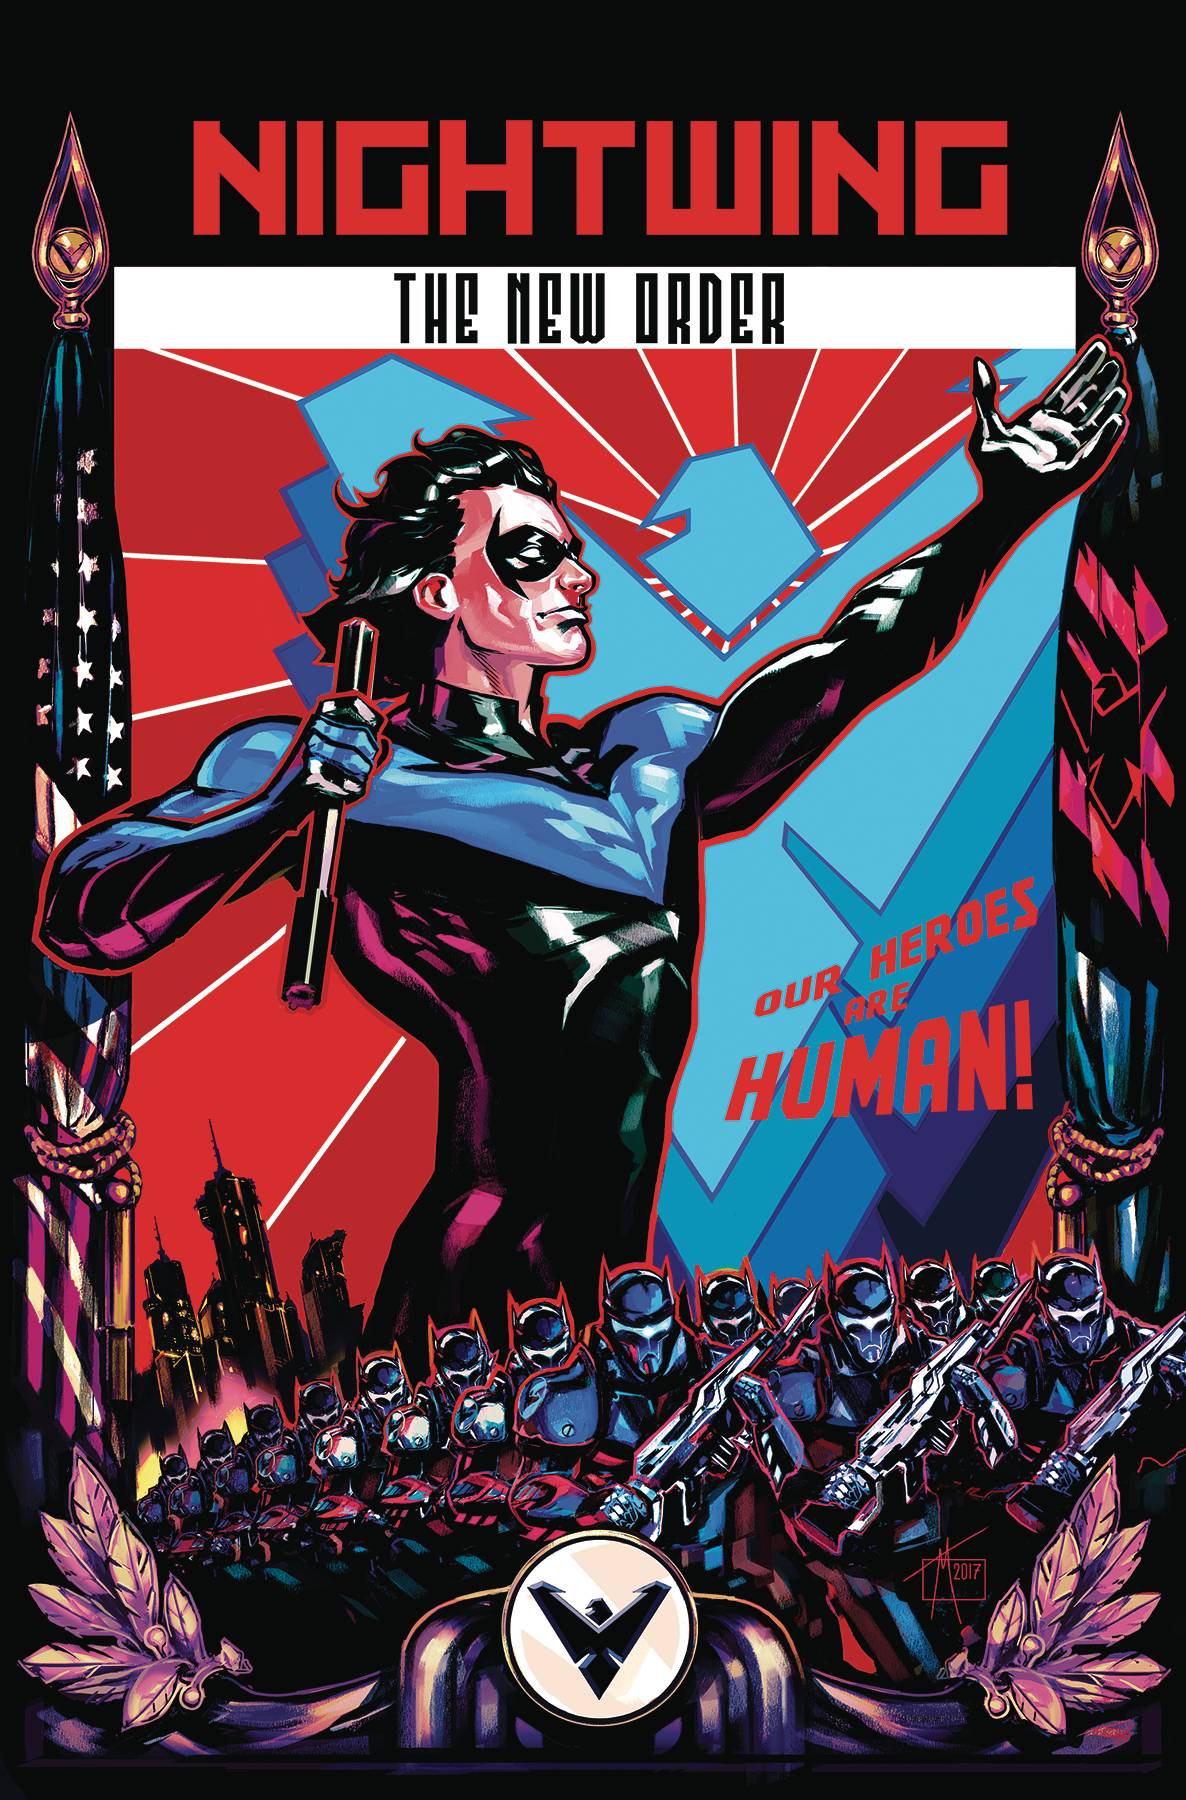 Nightwing The New Order #1